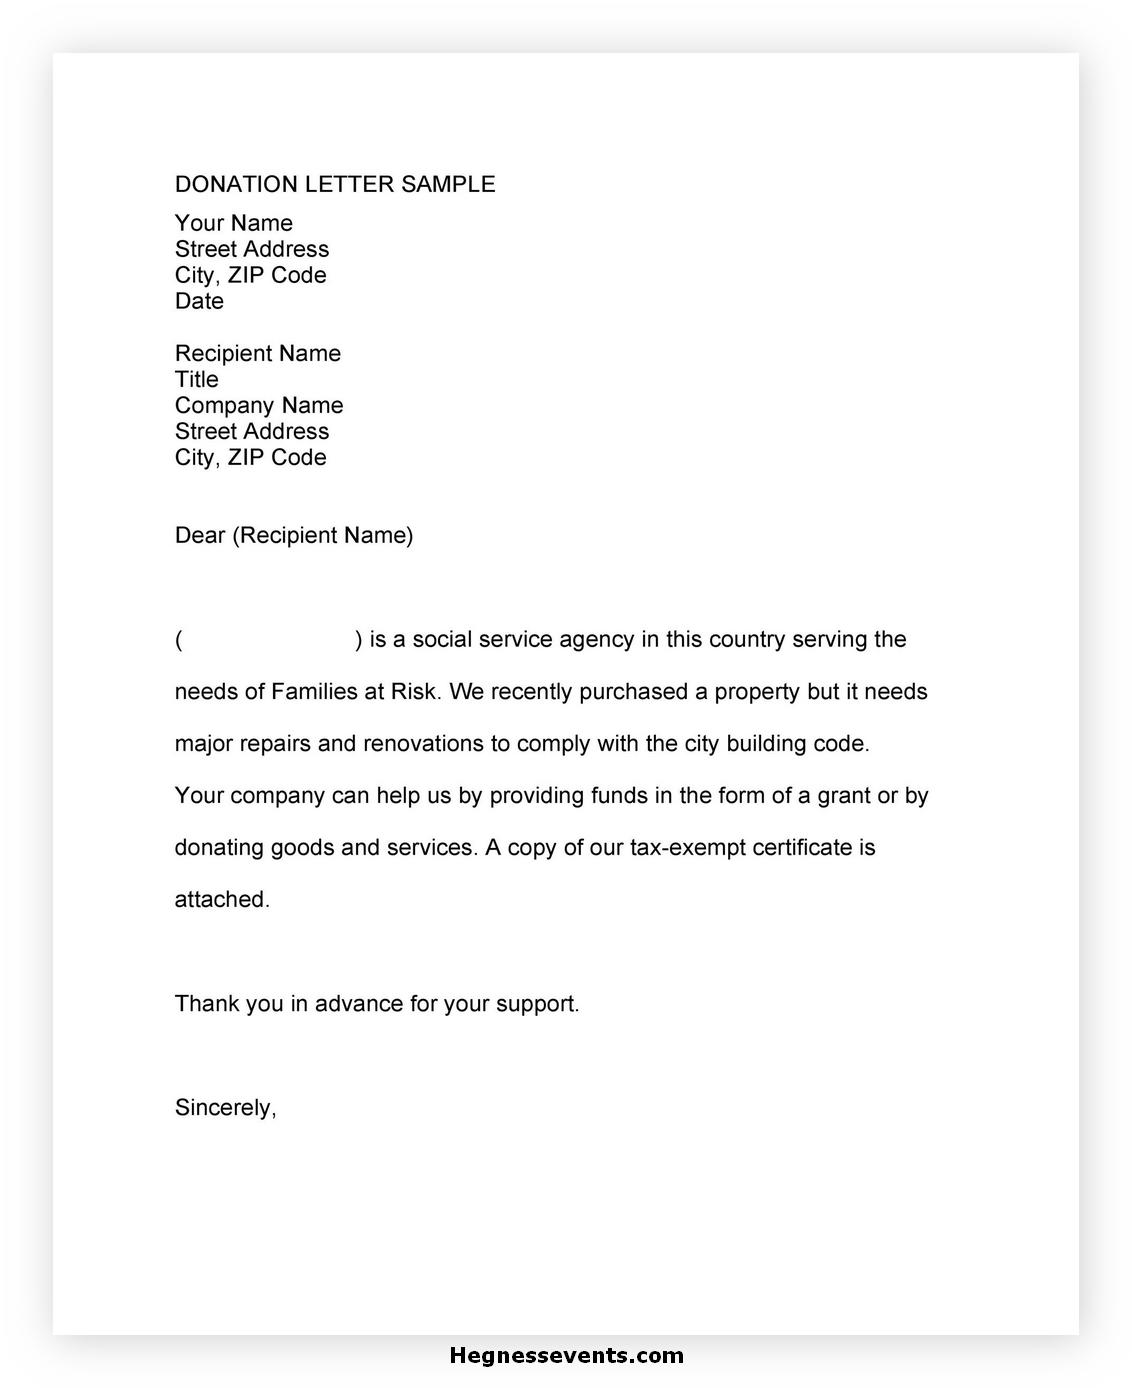 Make Your Own Donation Letter Greatly With 50 Free Template | hennessy ...